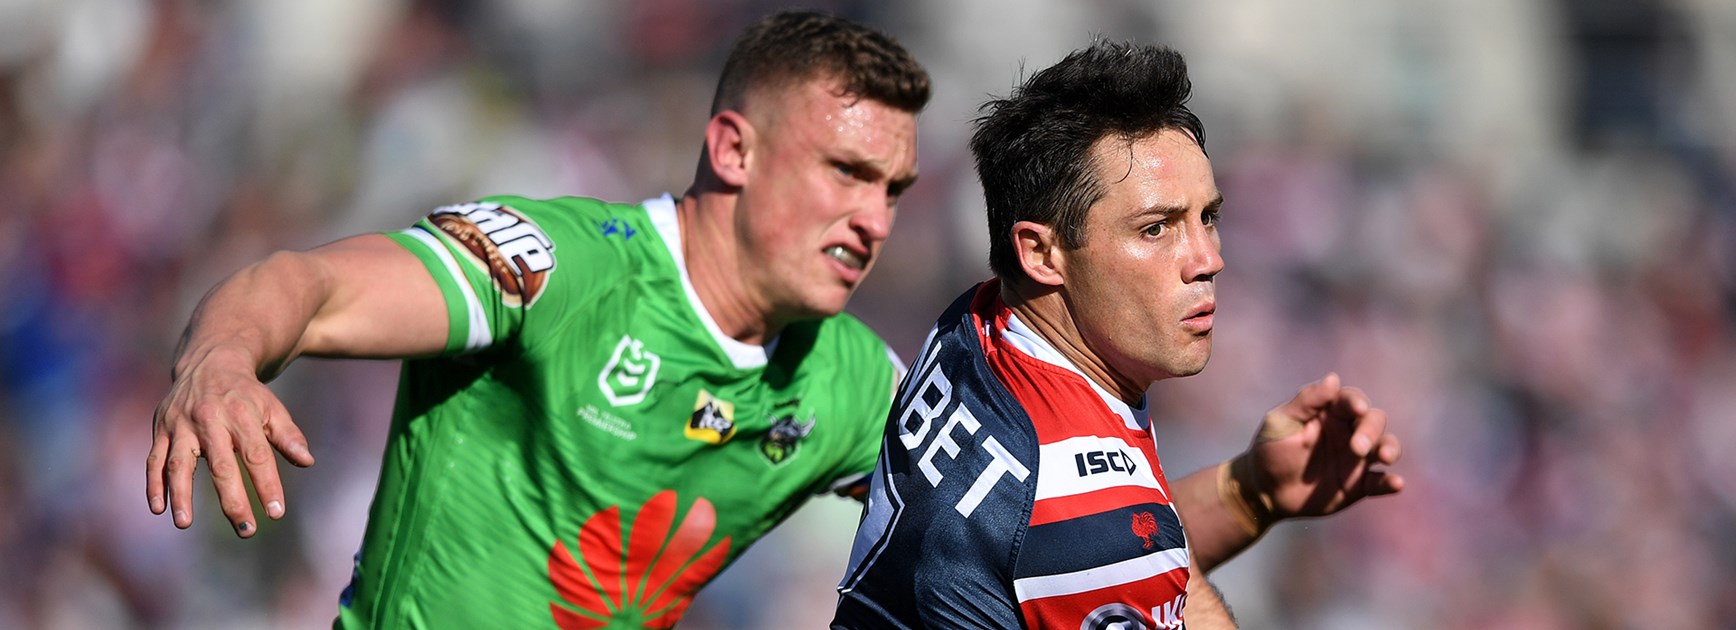 Grand Final Preview | Roosters v Raiders